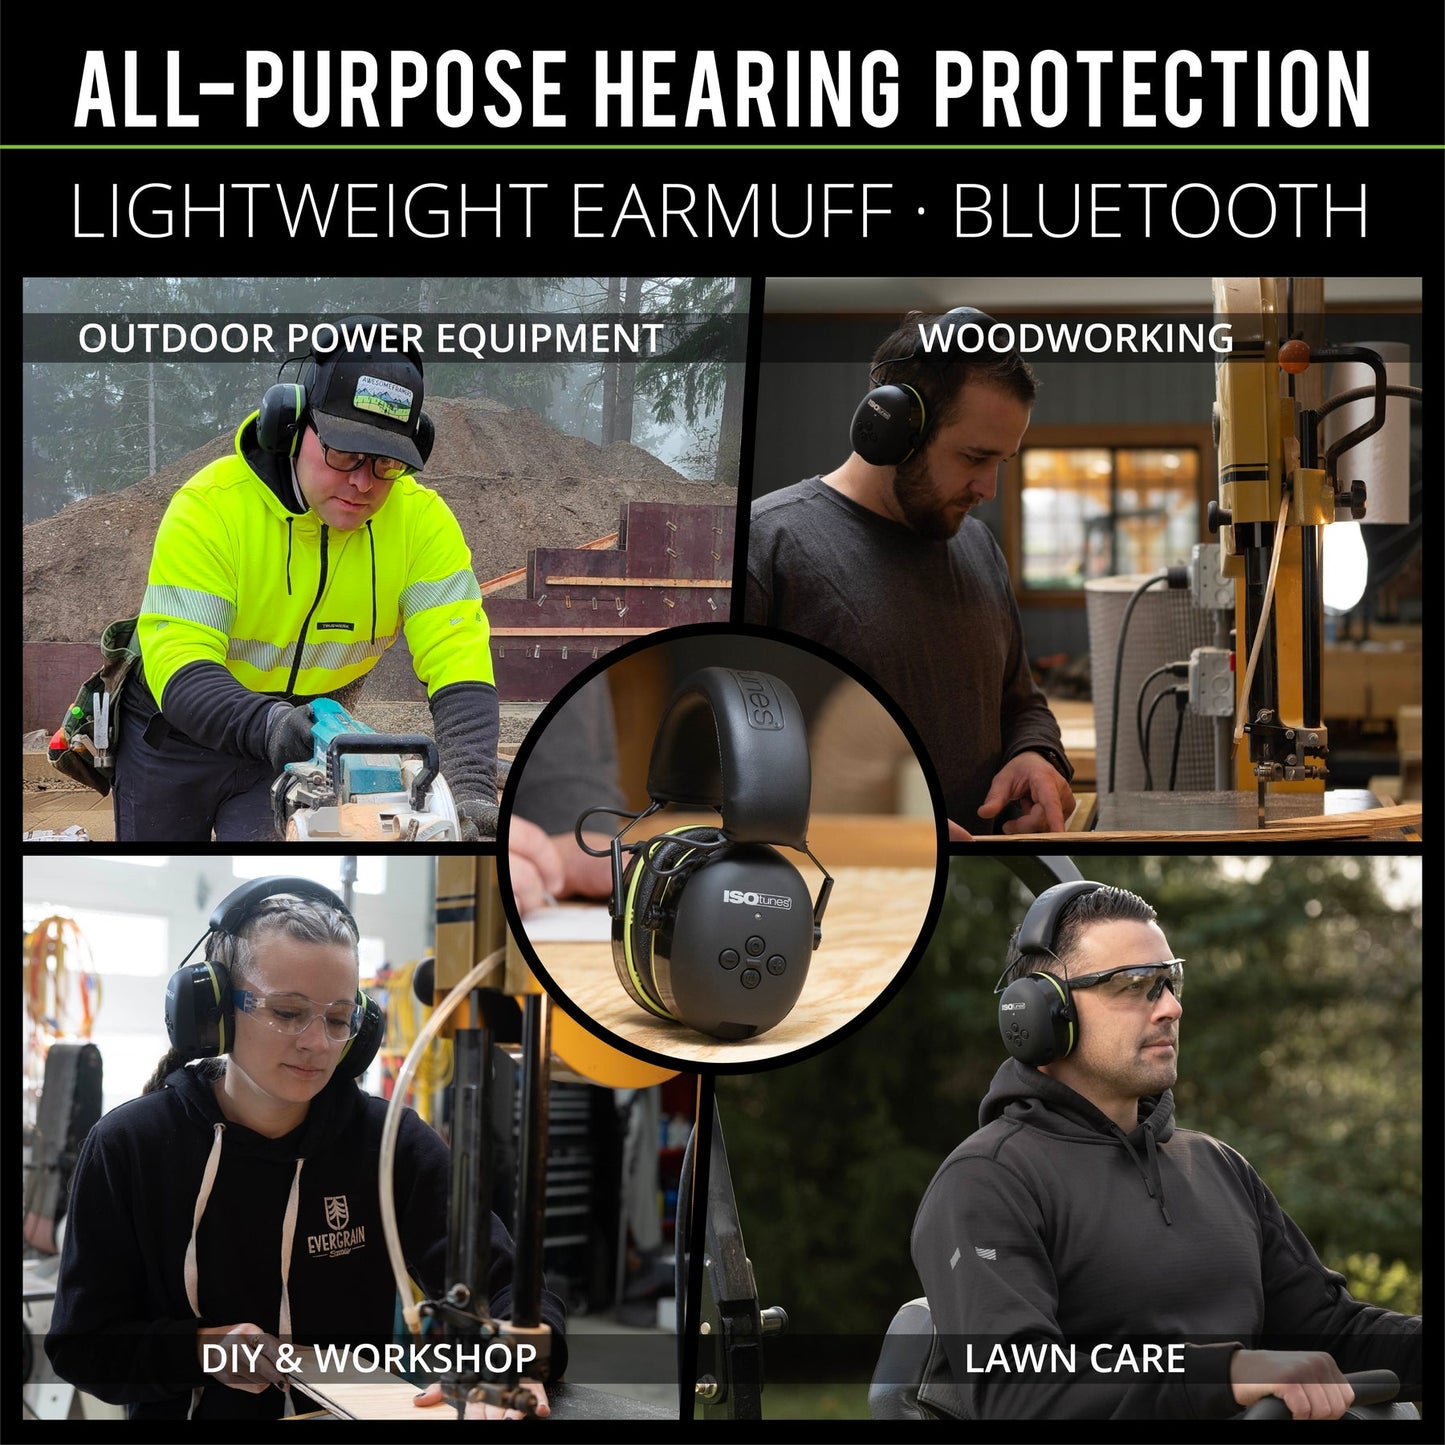 IsoTunes Wireless Safety Air Defender Safety Earmuffs with Bluetooth